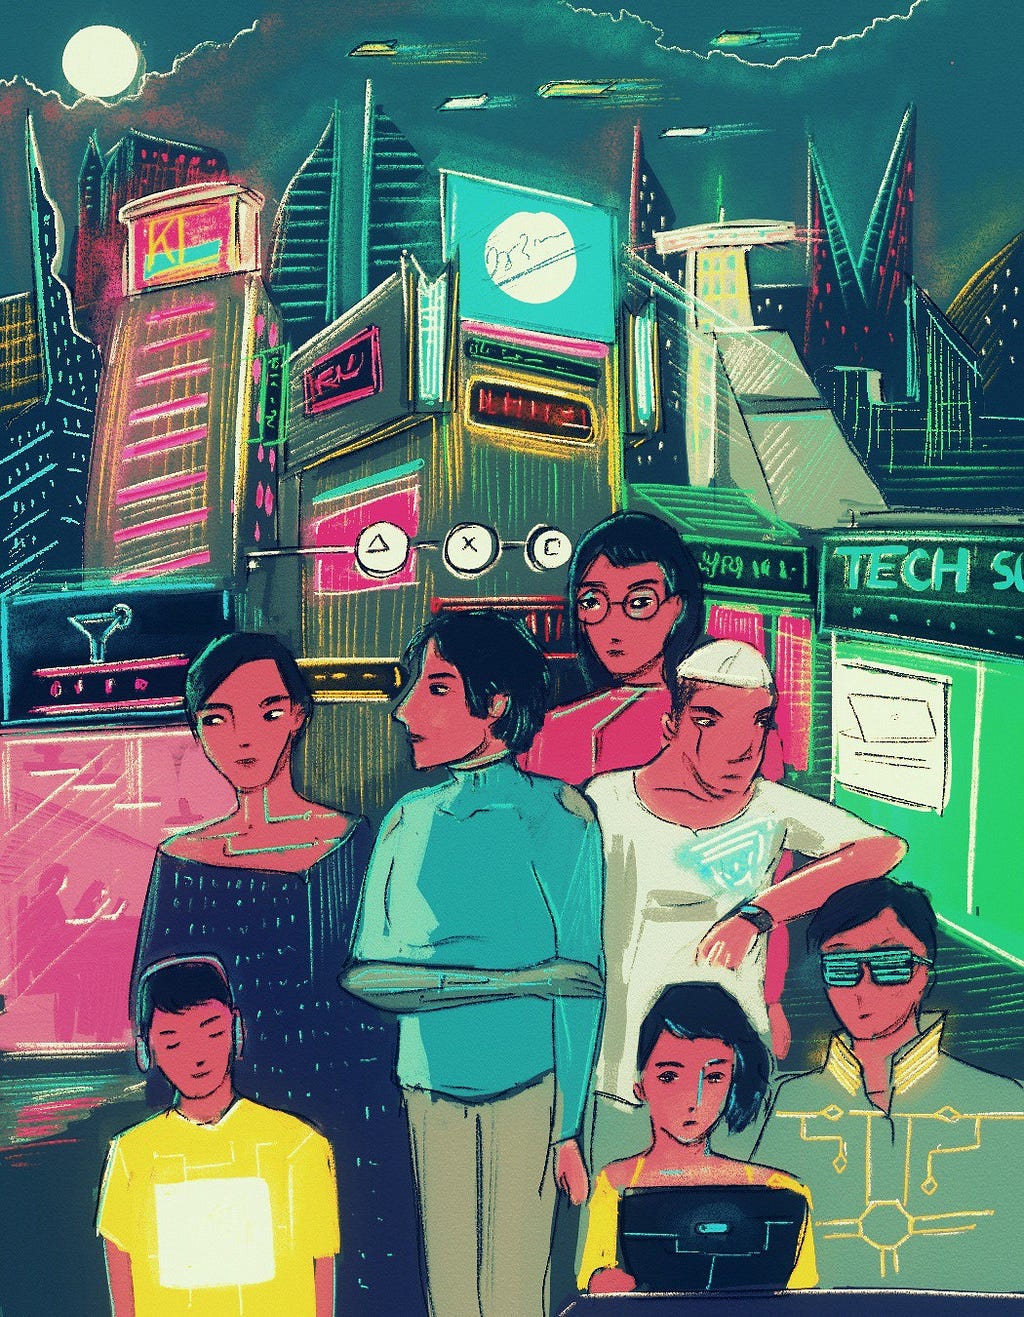 A number of people (each wearing a device or prosthetic) stand together against the background of a futuristic city.